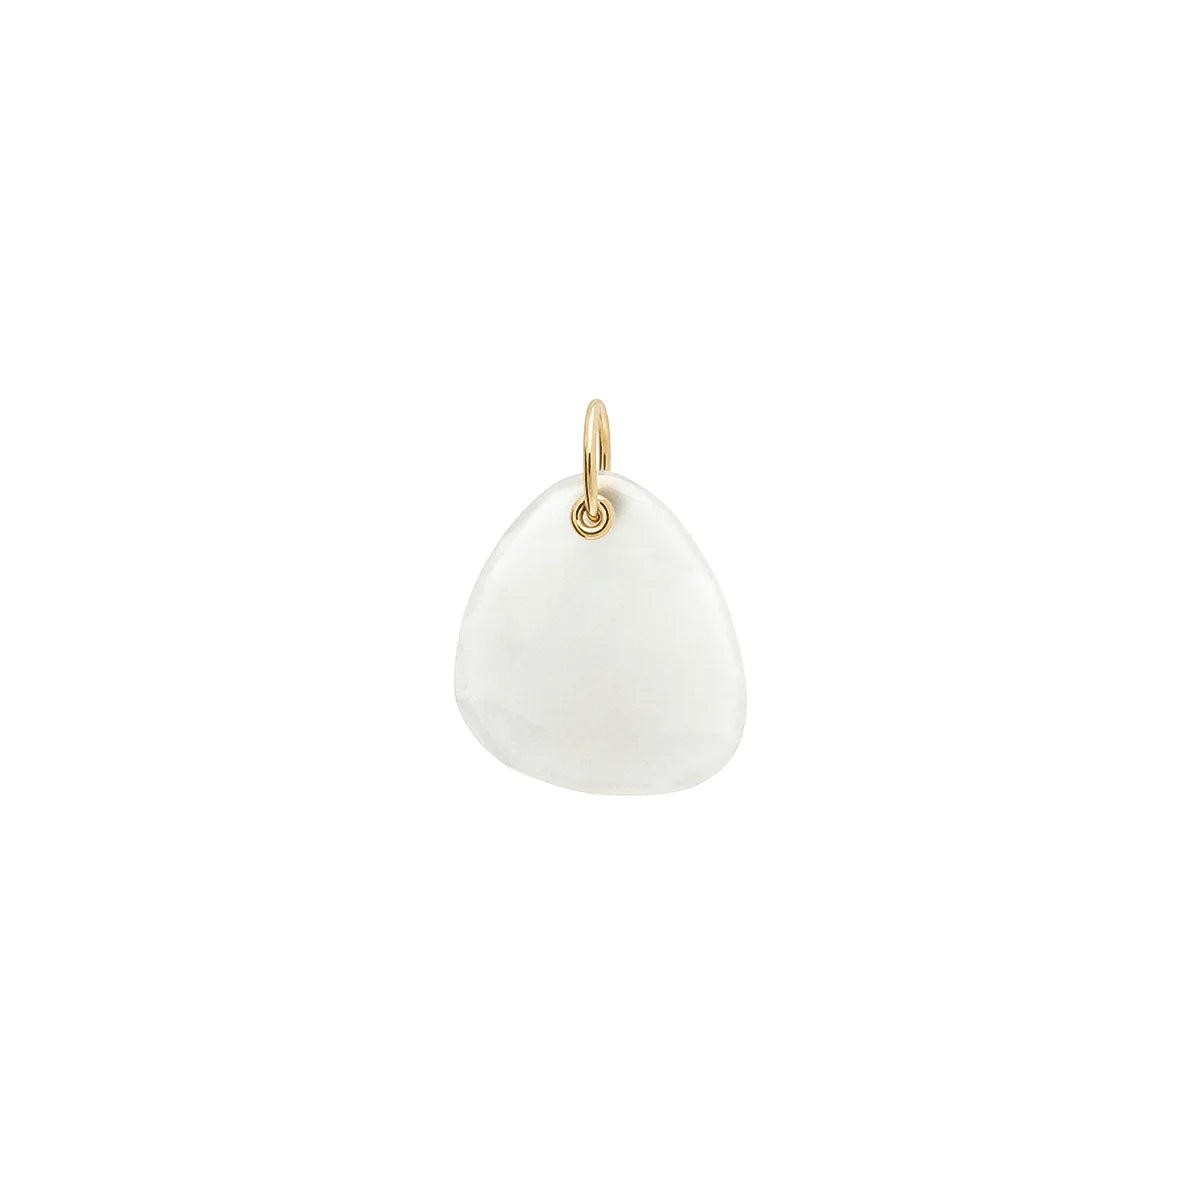 anne sportun 18k yellow gold trillion faceted moonstone charm